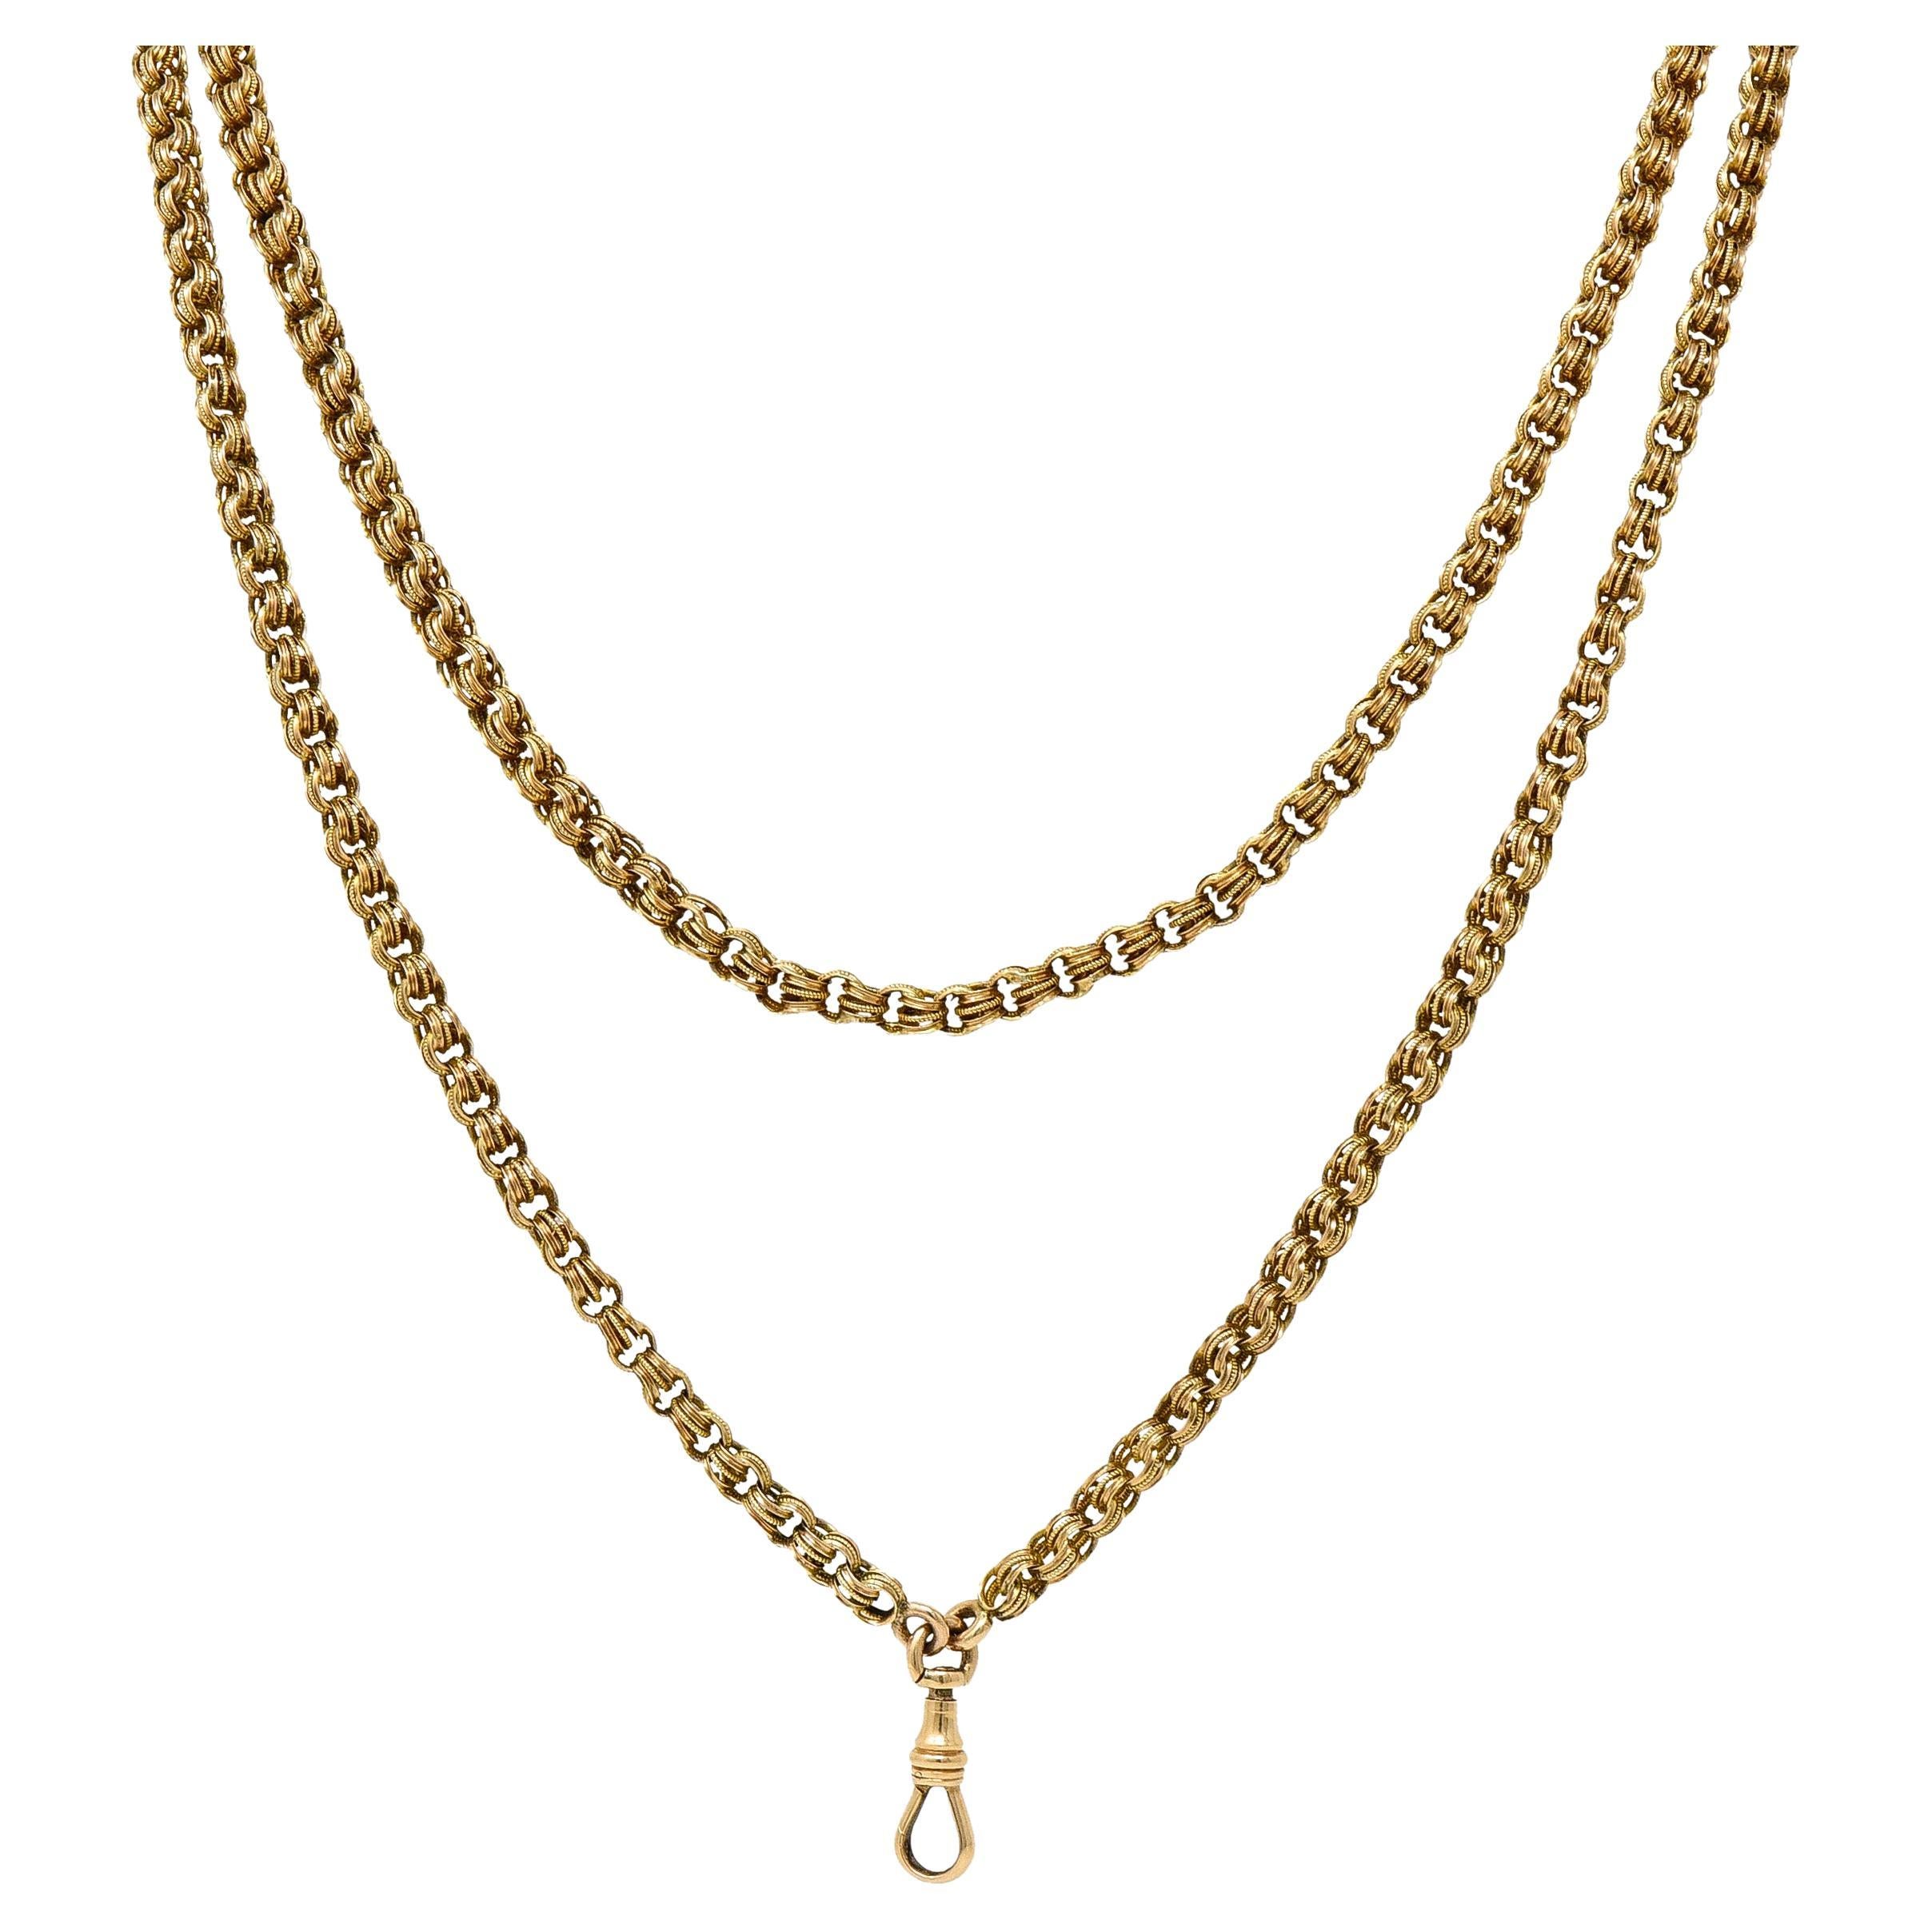 Victorian 14 Karat Yellow Gold Rollo Link Long Antique Fob Chain Necklace For Sale